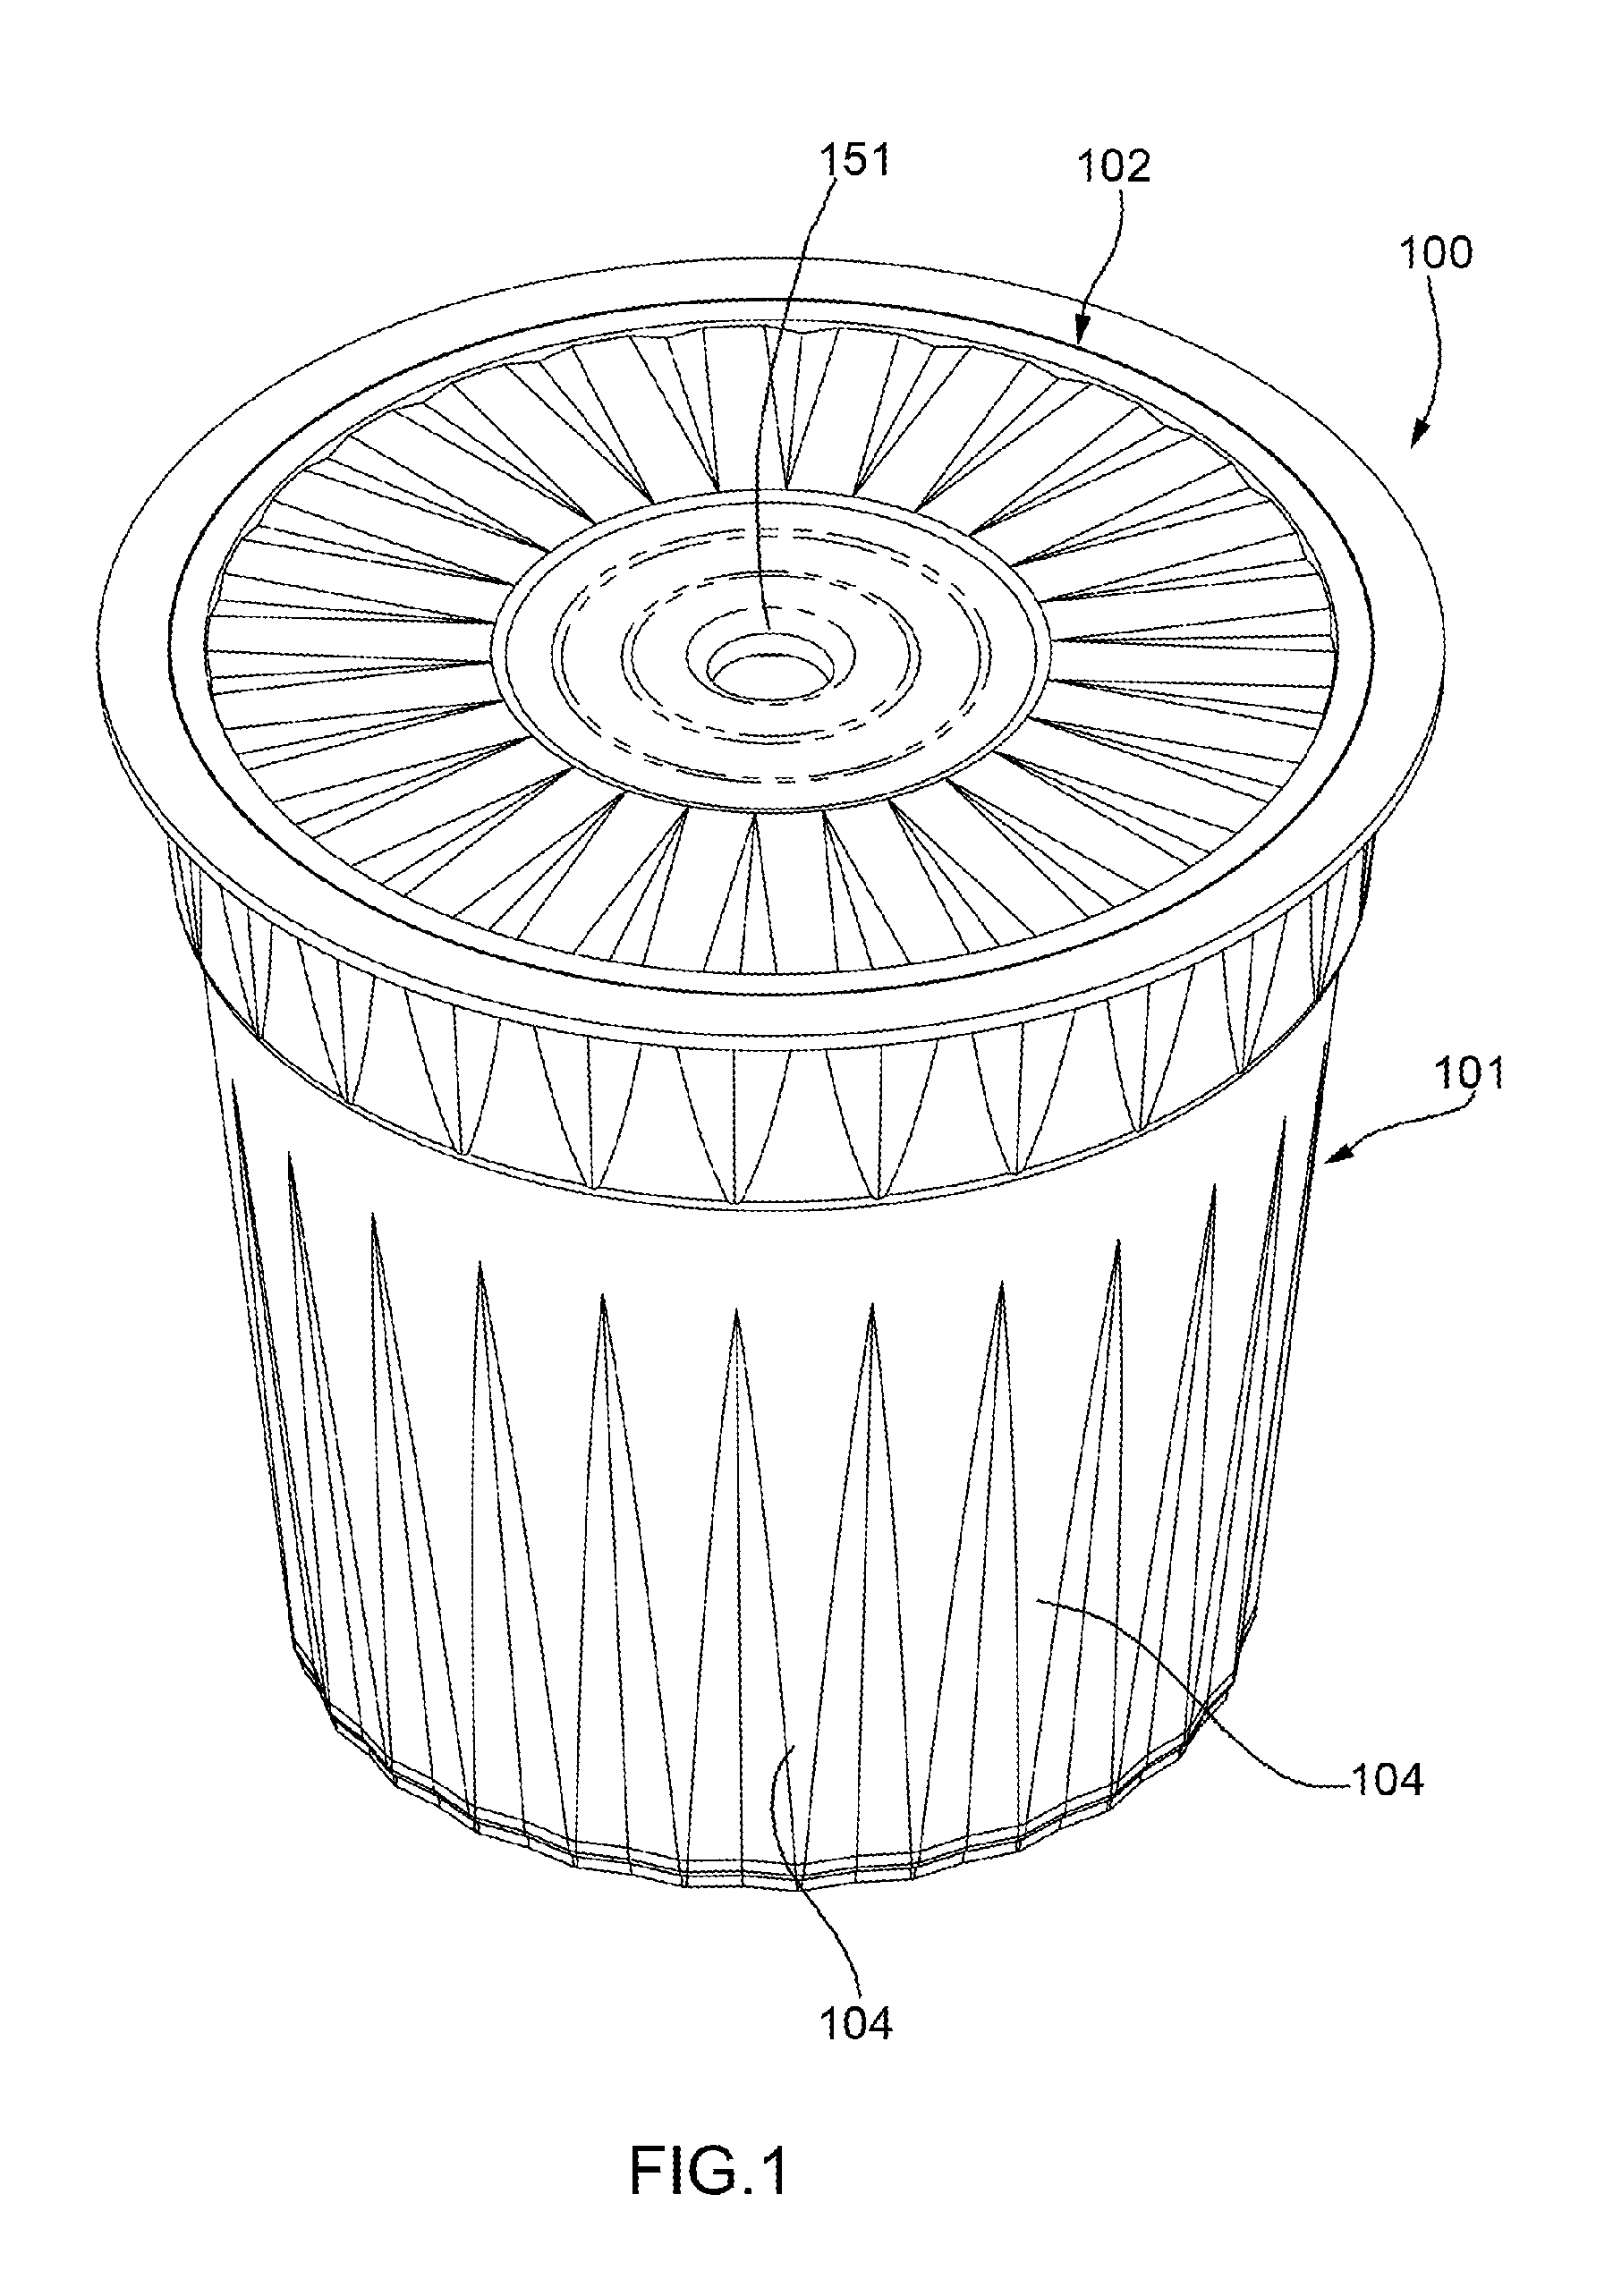 Interchangeable capsule for preparing an infusion of coffee, and method for obtaining an infusion of said coffee